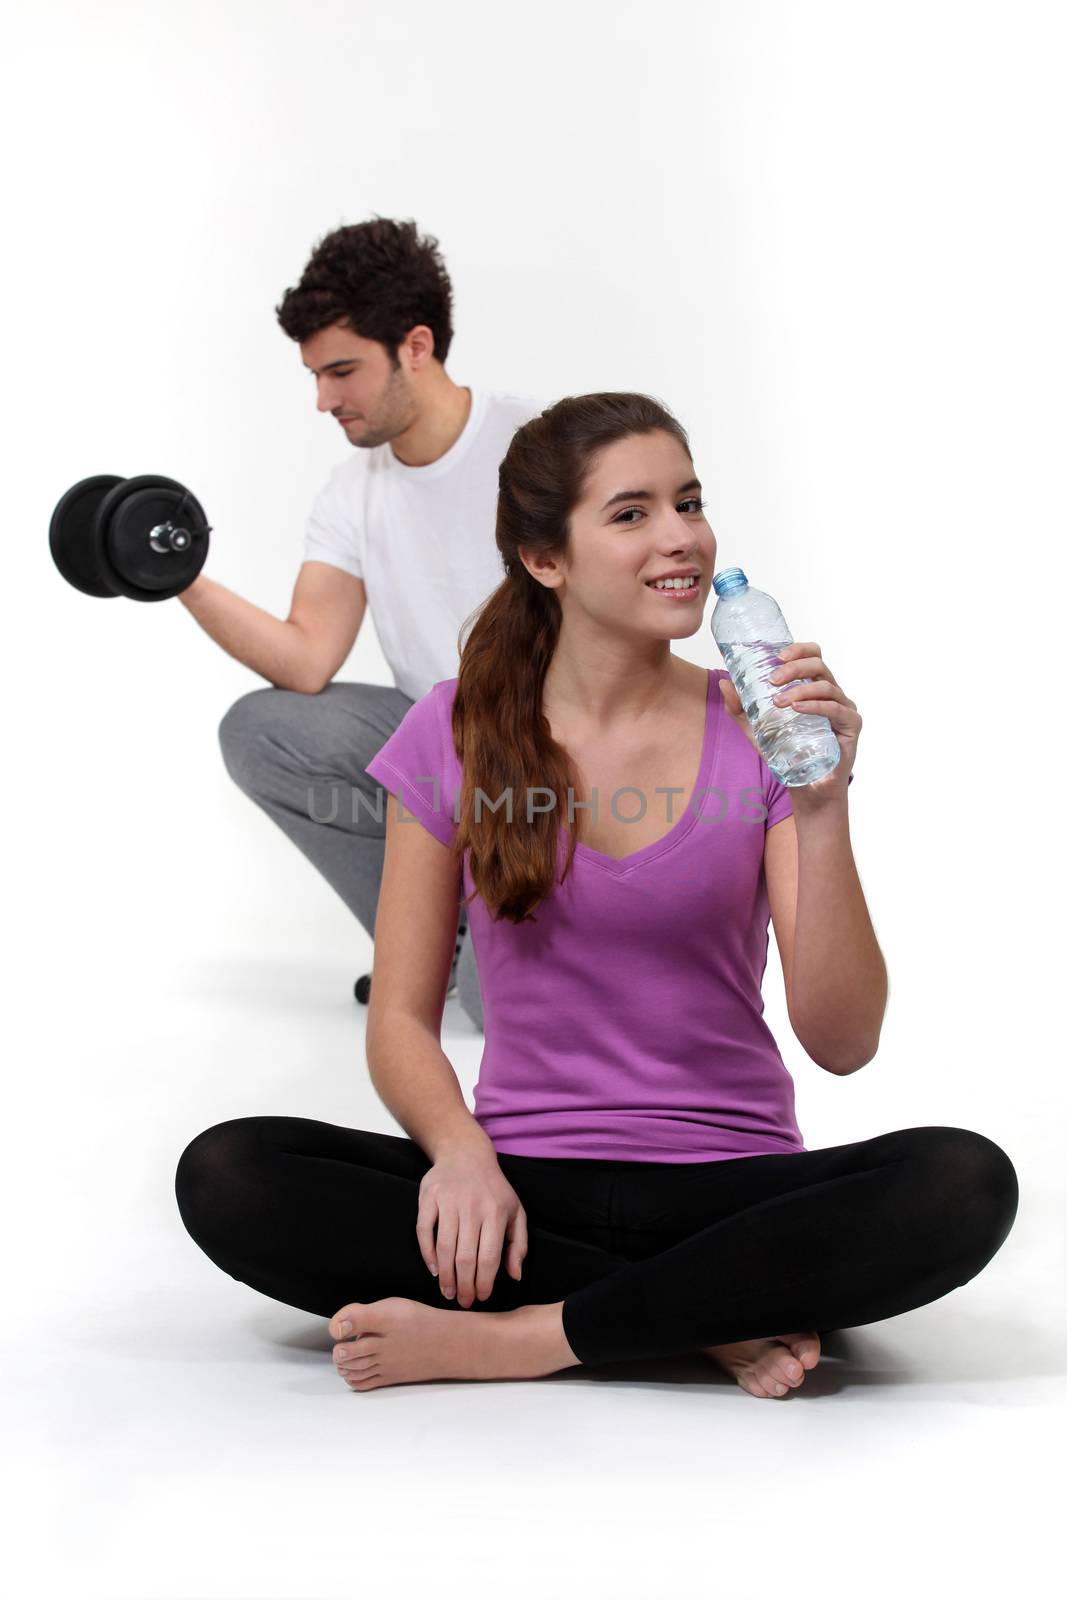 A young couple working out. by phovoir